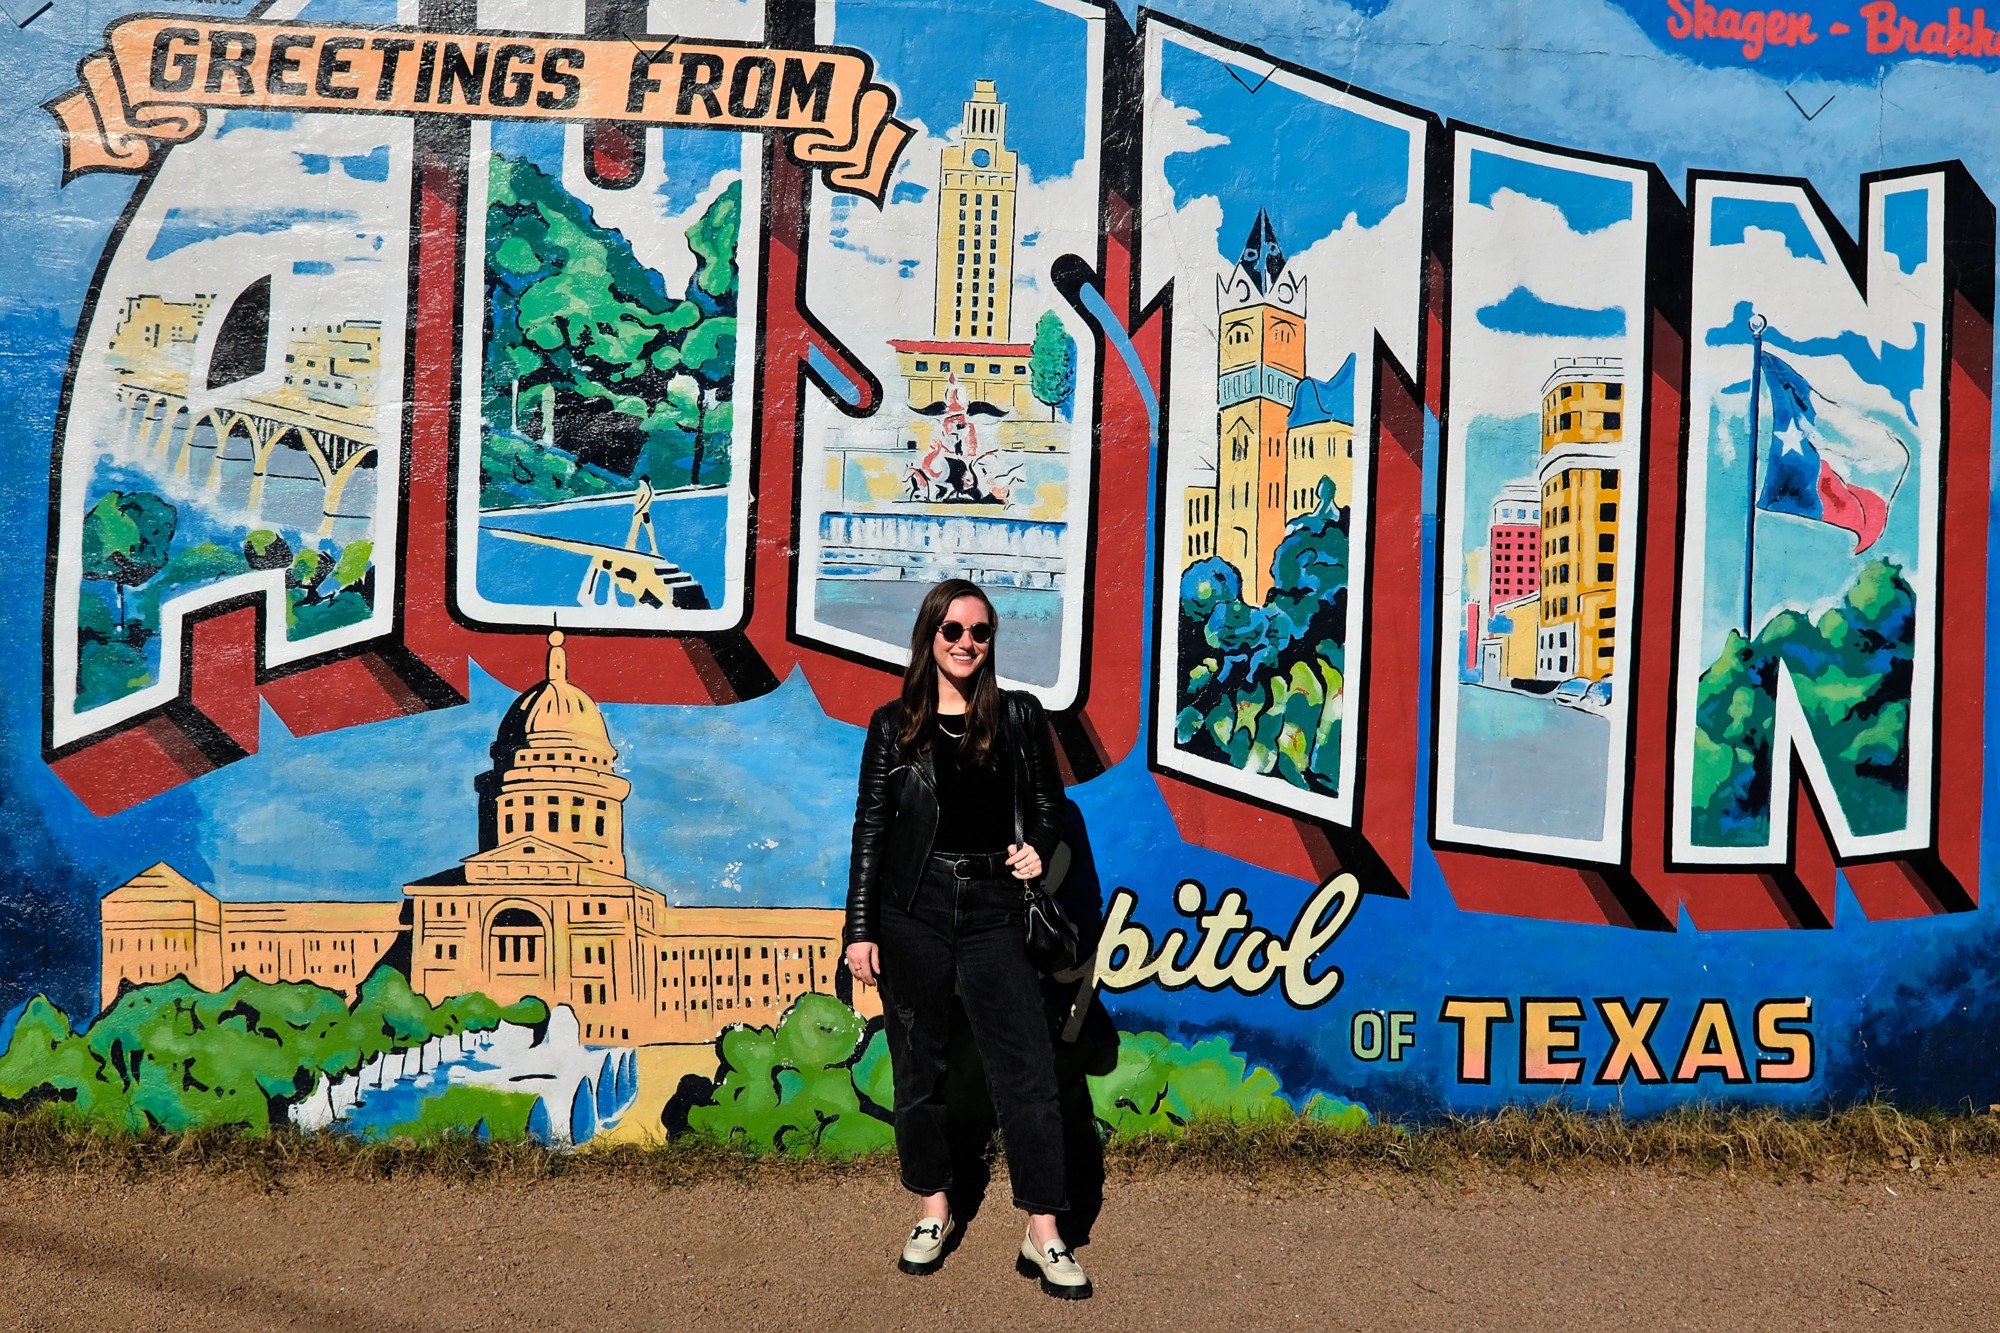 Alyssa in front of the Austin postcard sign